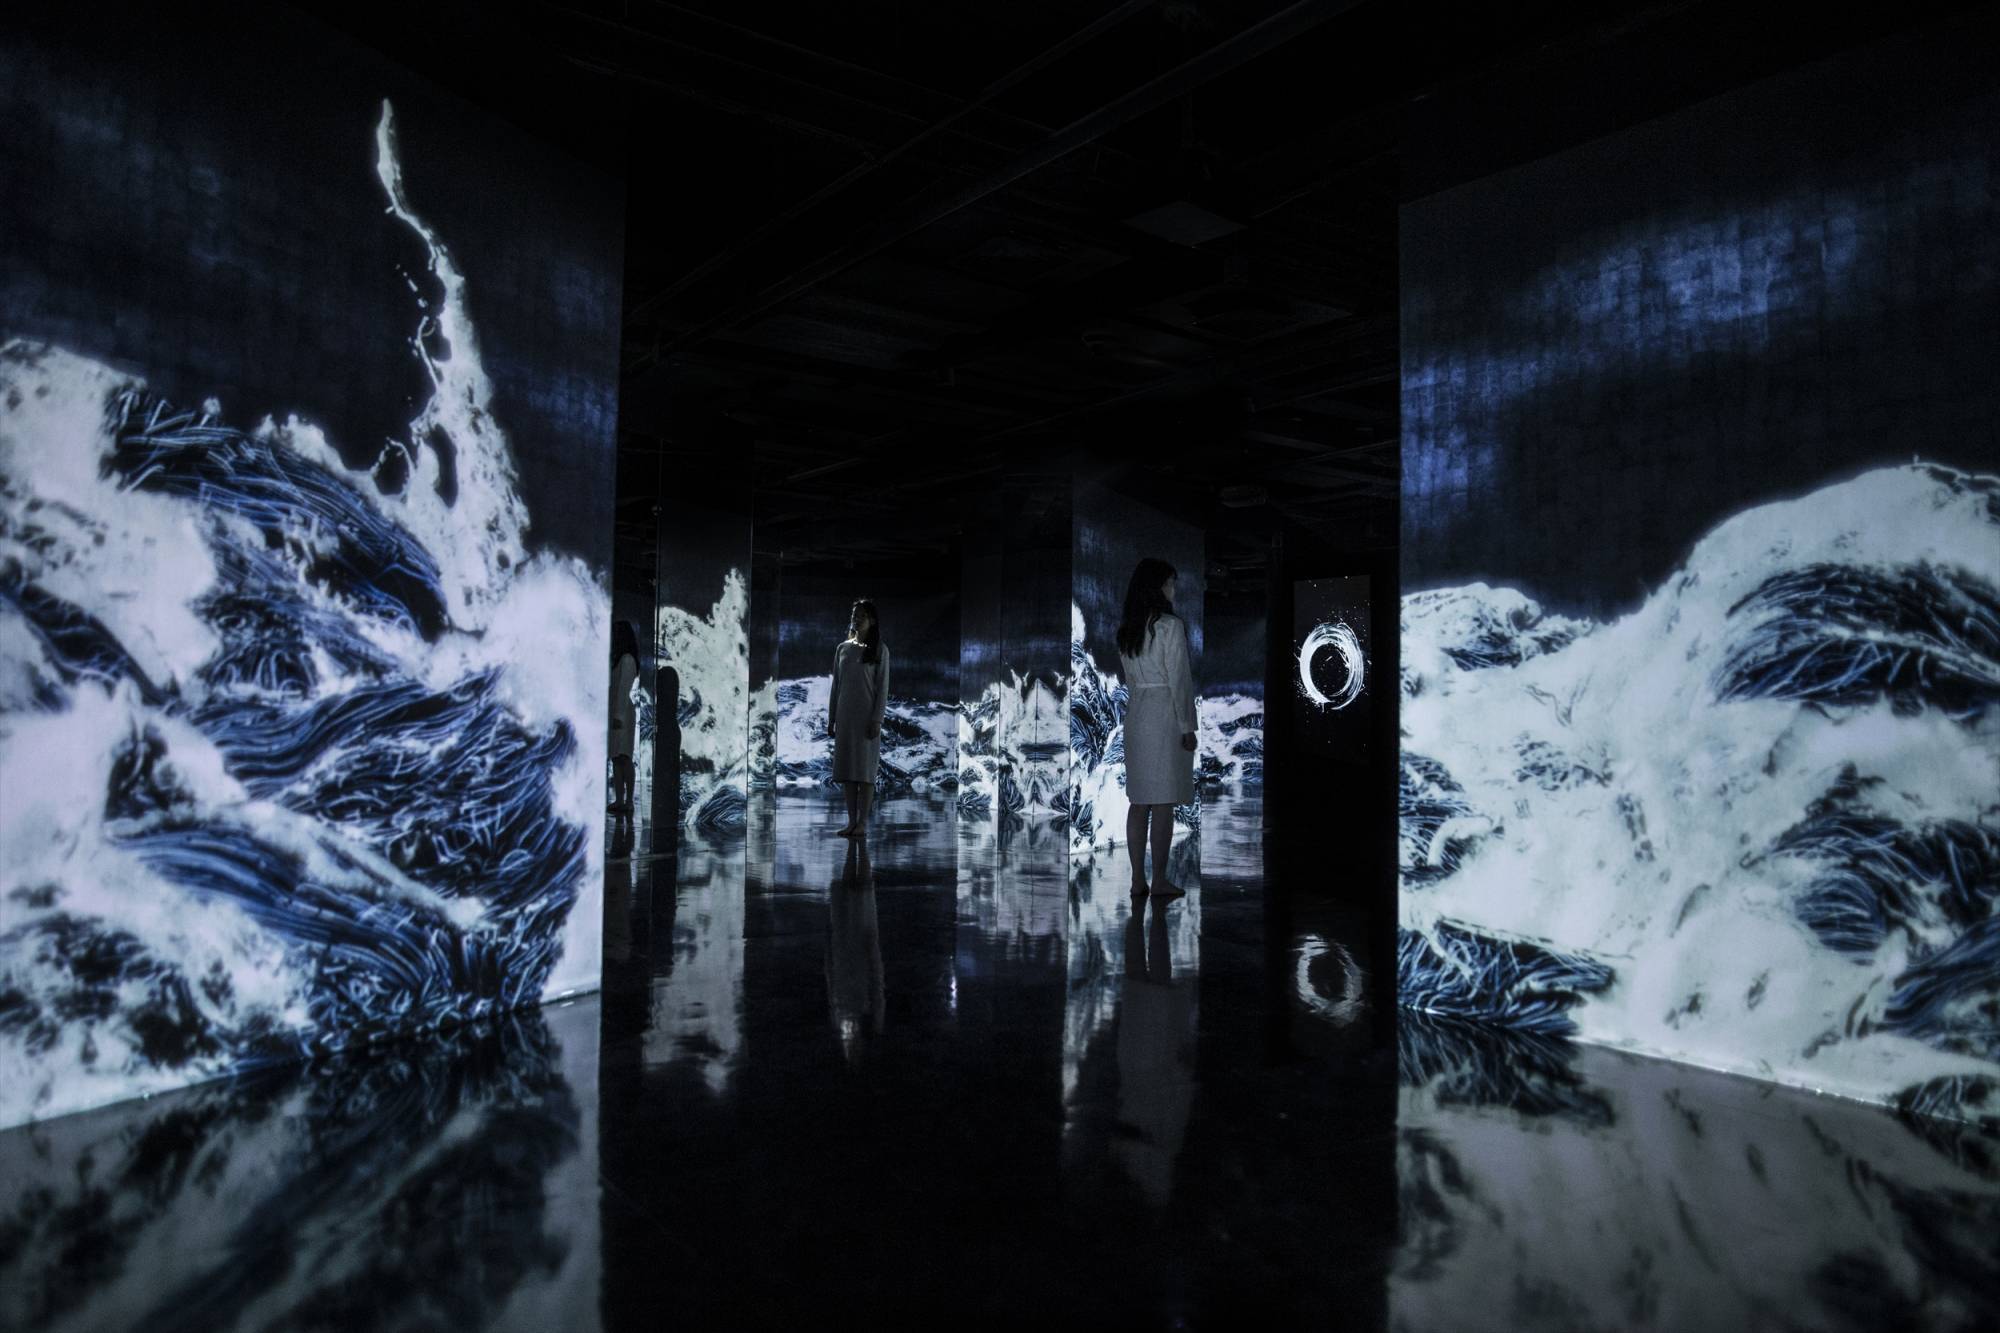 Stills from "Universe of Water Particles in the Tank," a new art installation from teamLab set inside reclaimed oil tanks.